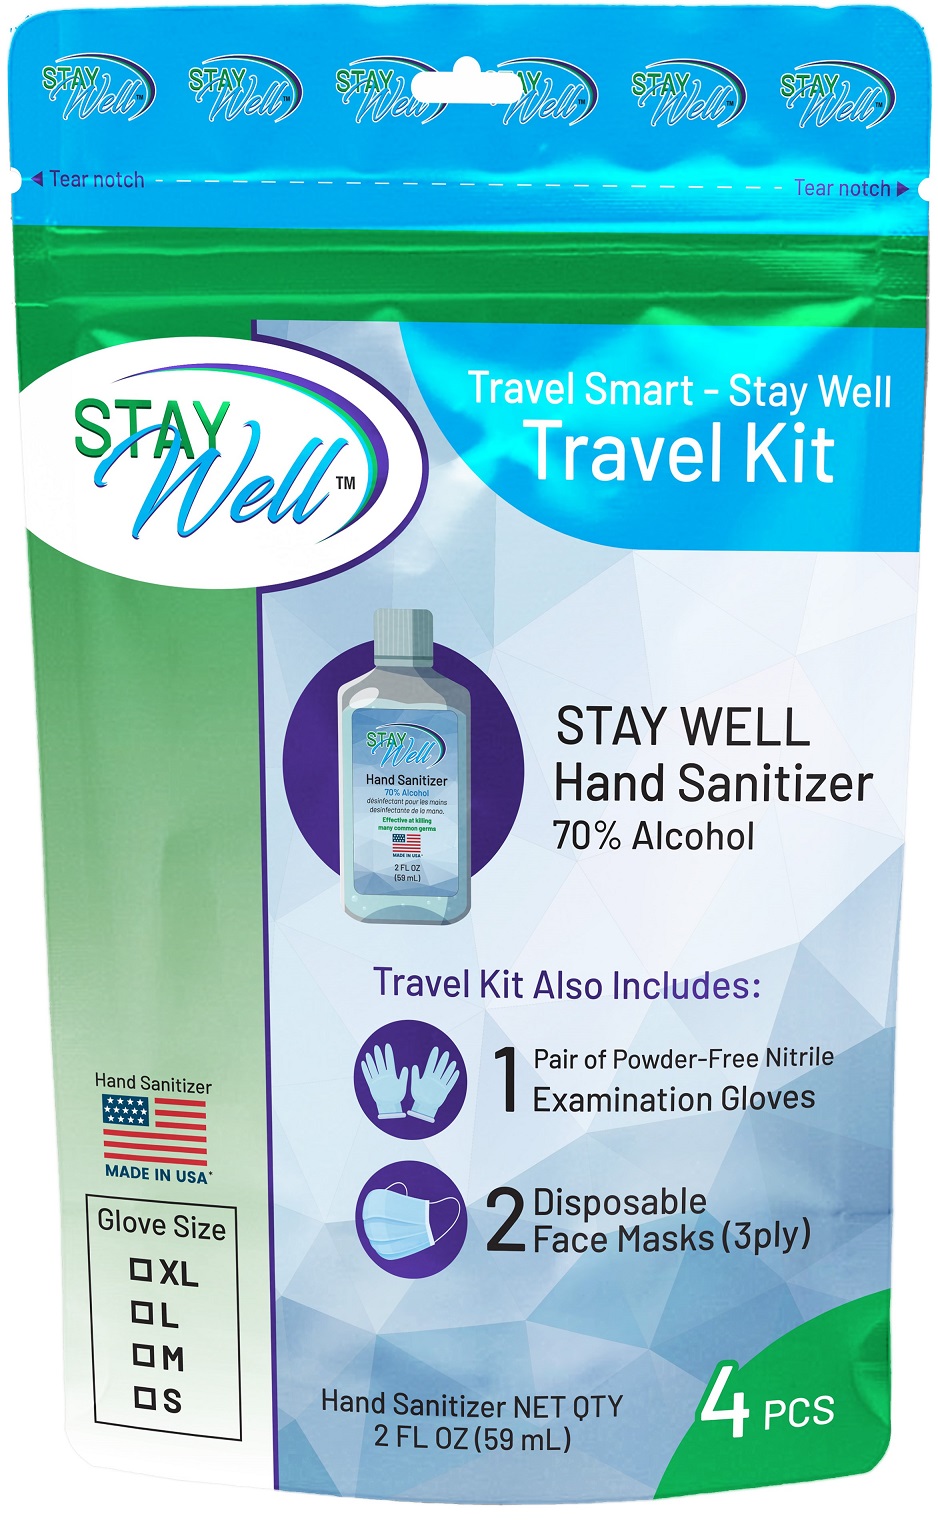 Stay Well Travel Kit Display Panel